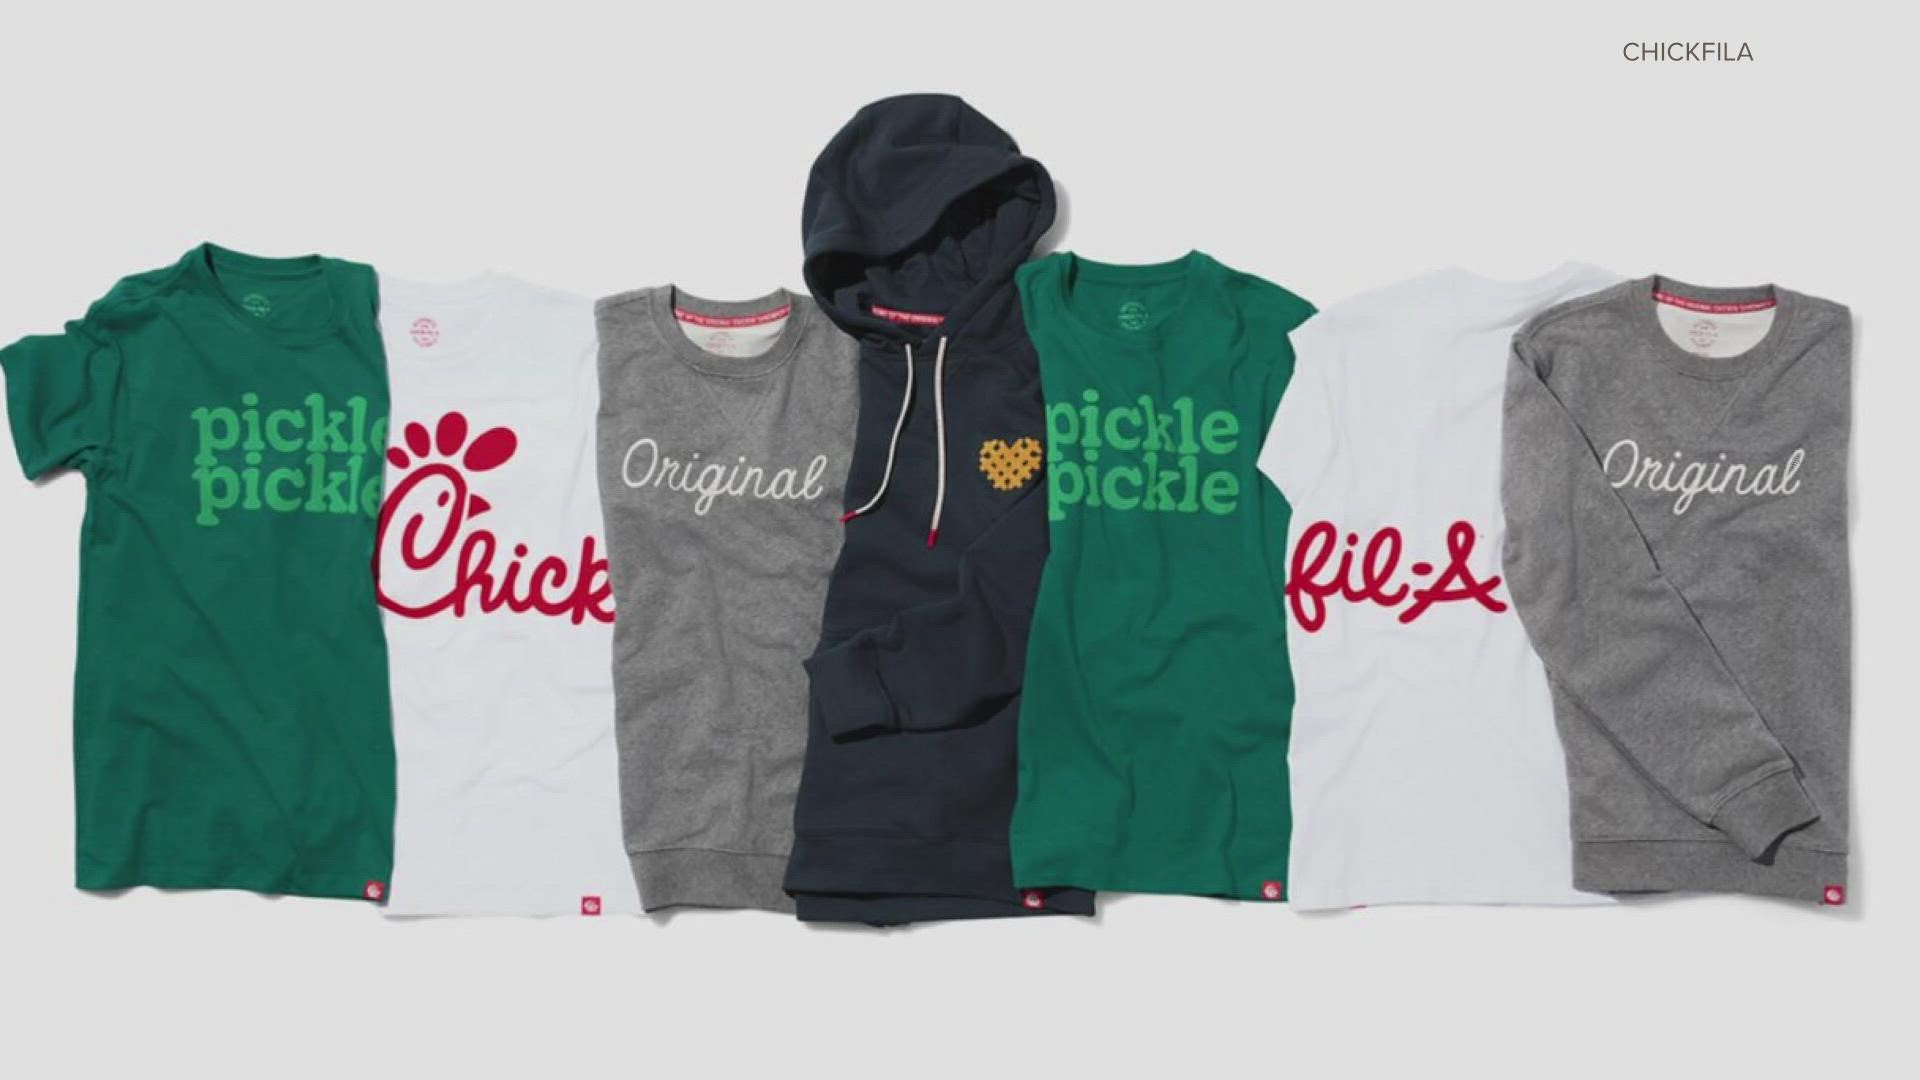 The Chick-fil-A sauce blanket and nugget pillow set are already sold out.